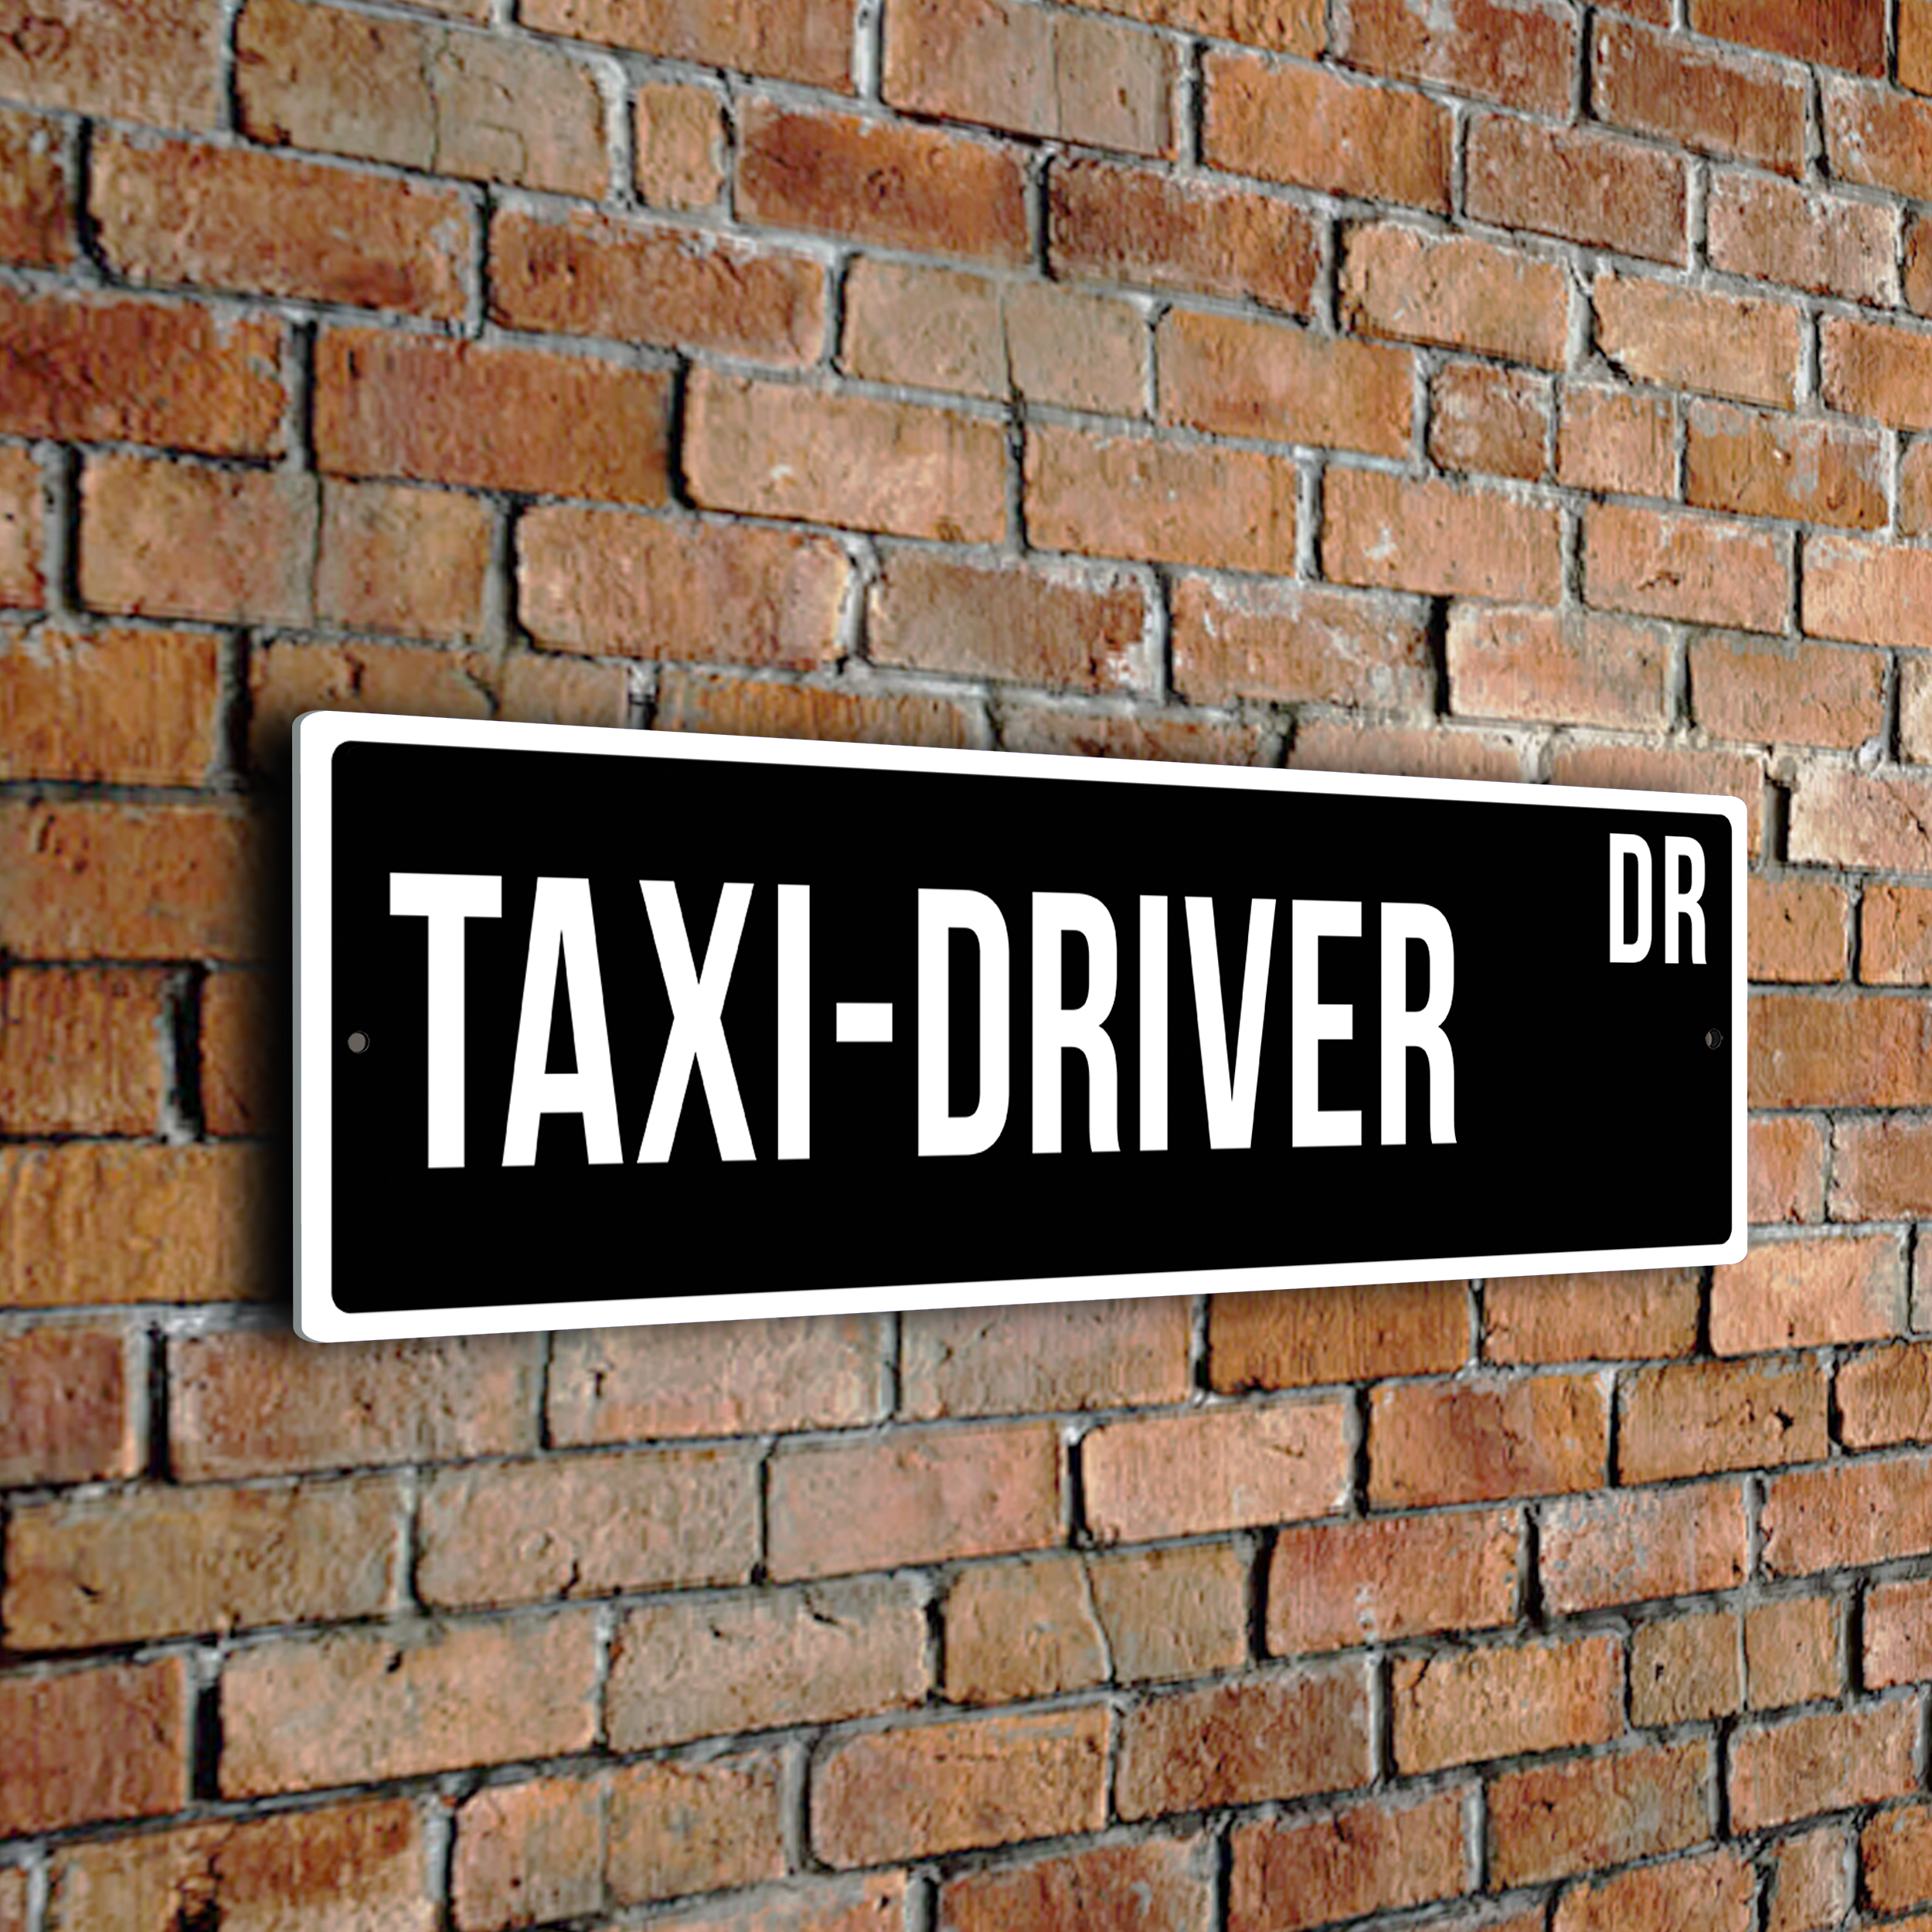 Taxi-Driver street sign